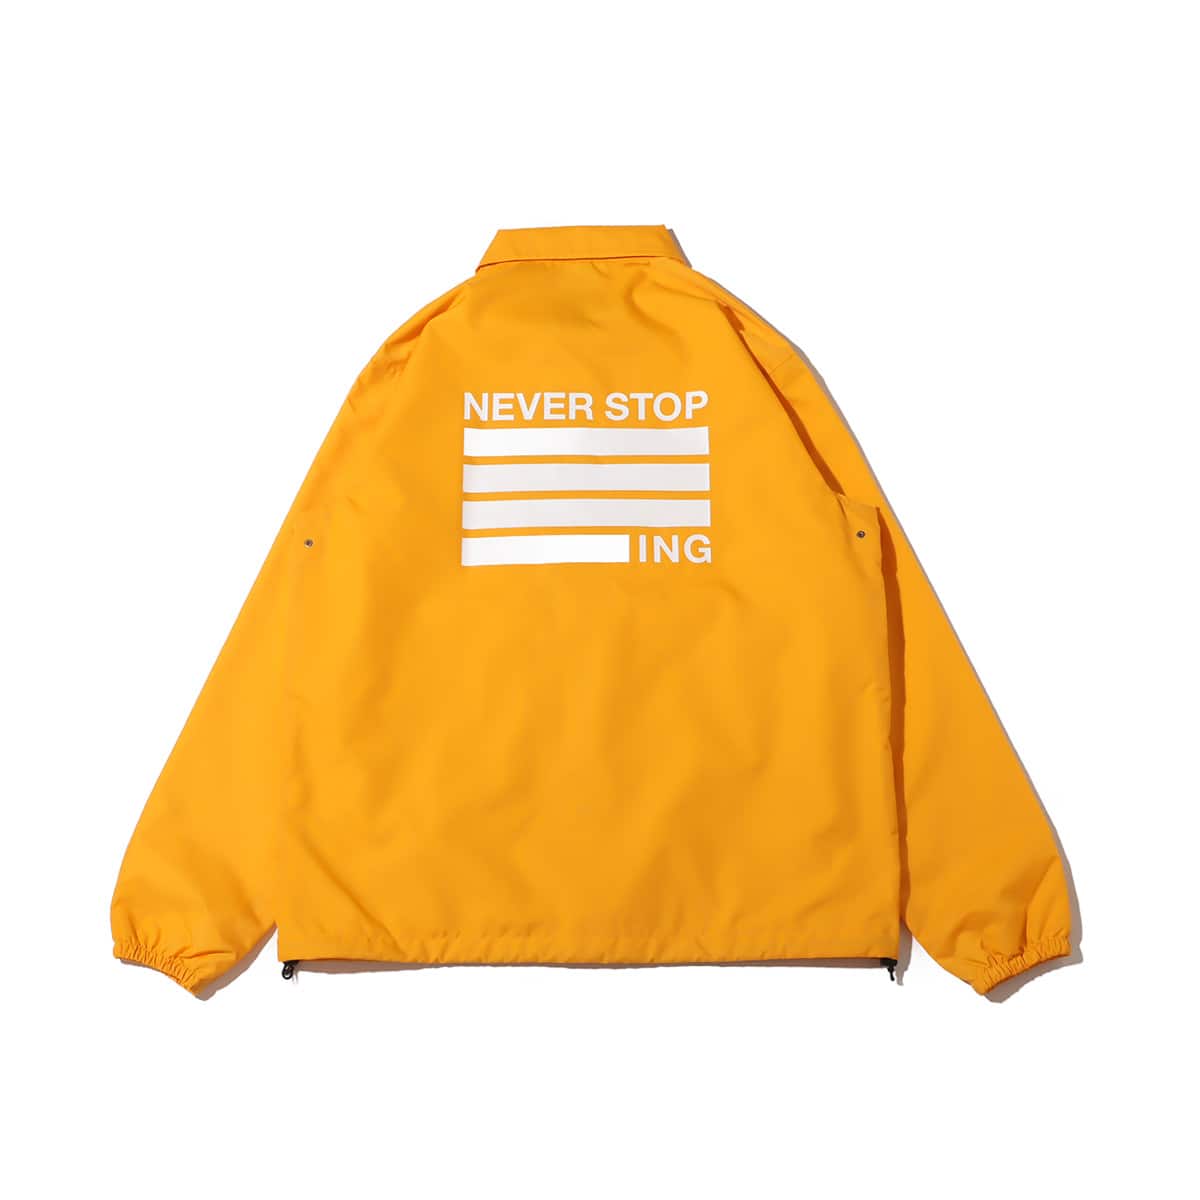 THE NORTH FACE NEVER STOP ING THE COACH JACKET サミットゴールド 23FW-I